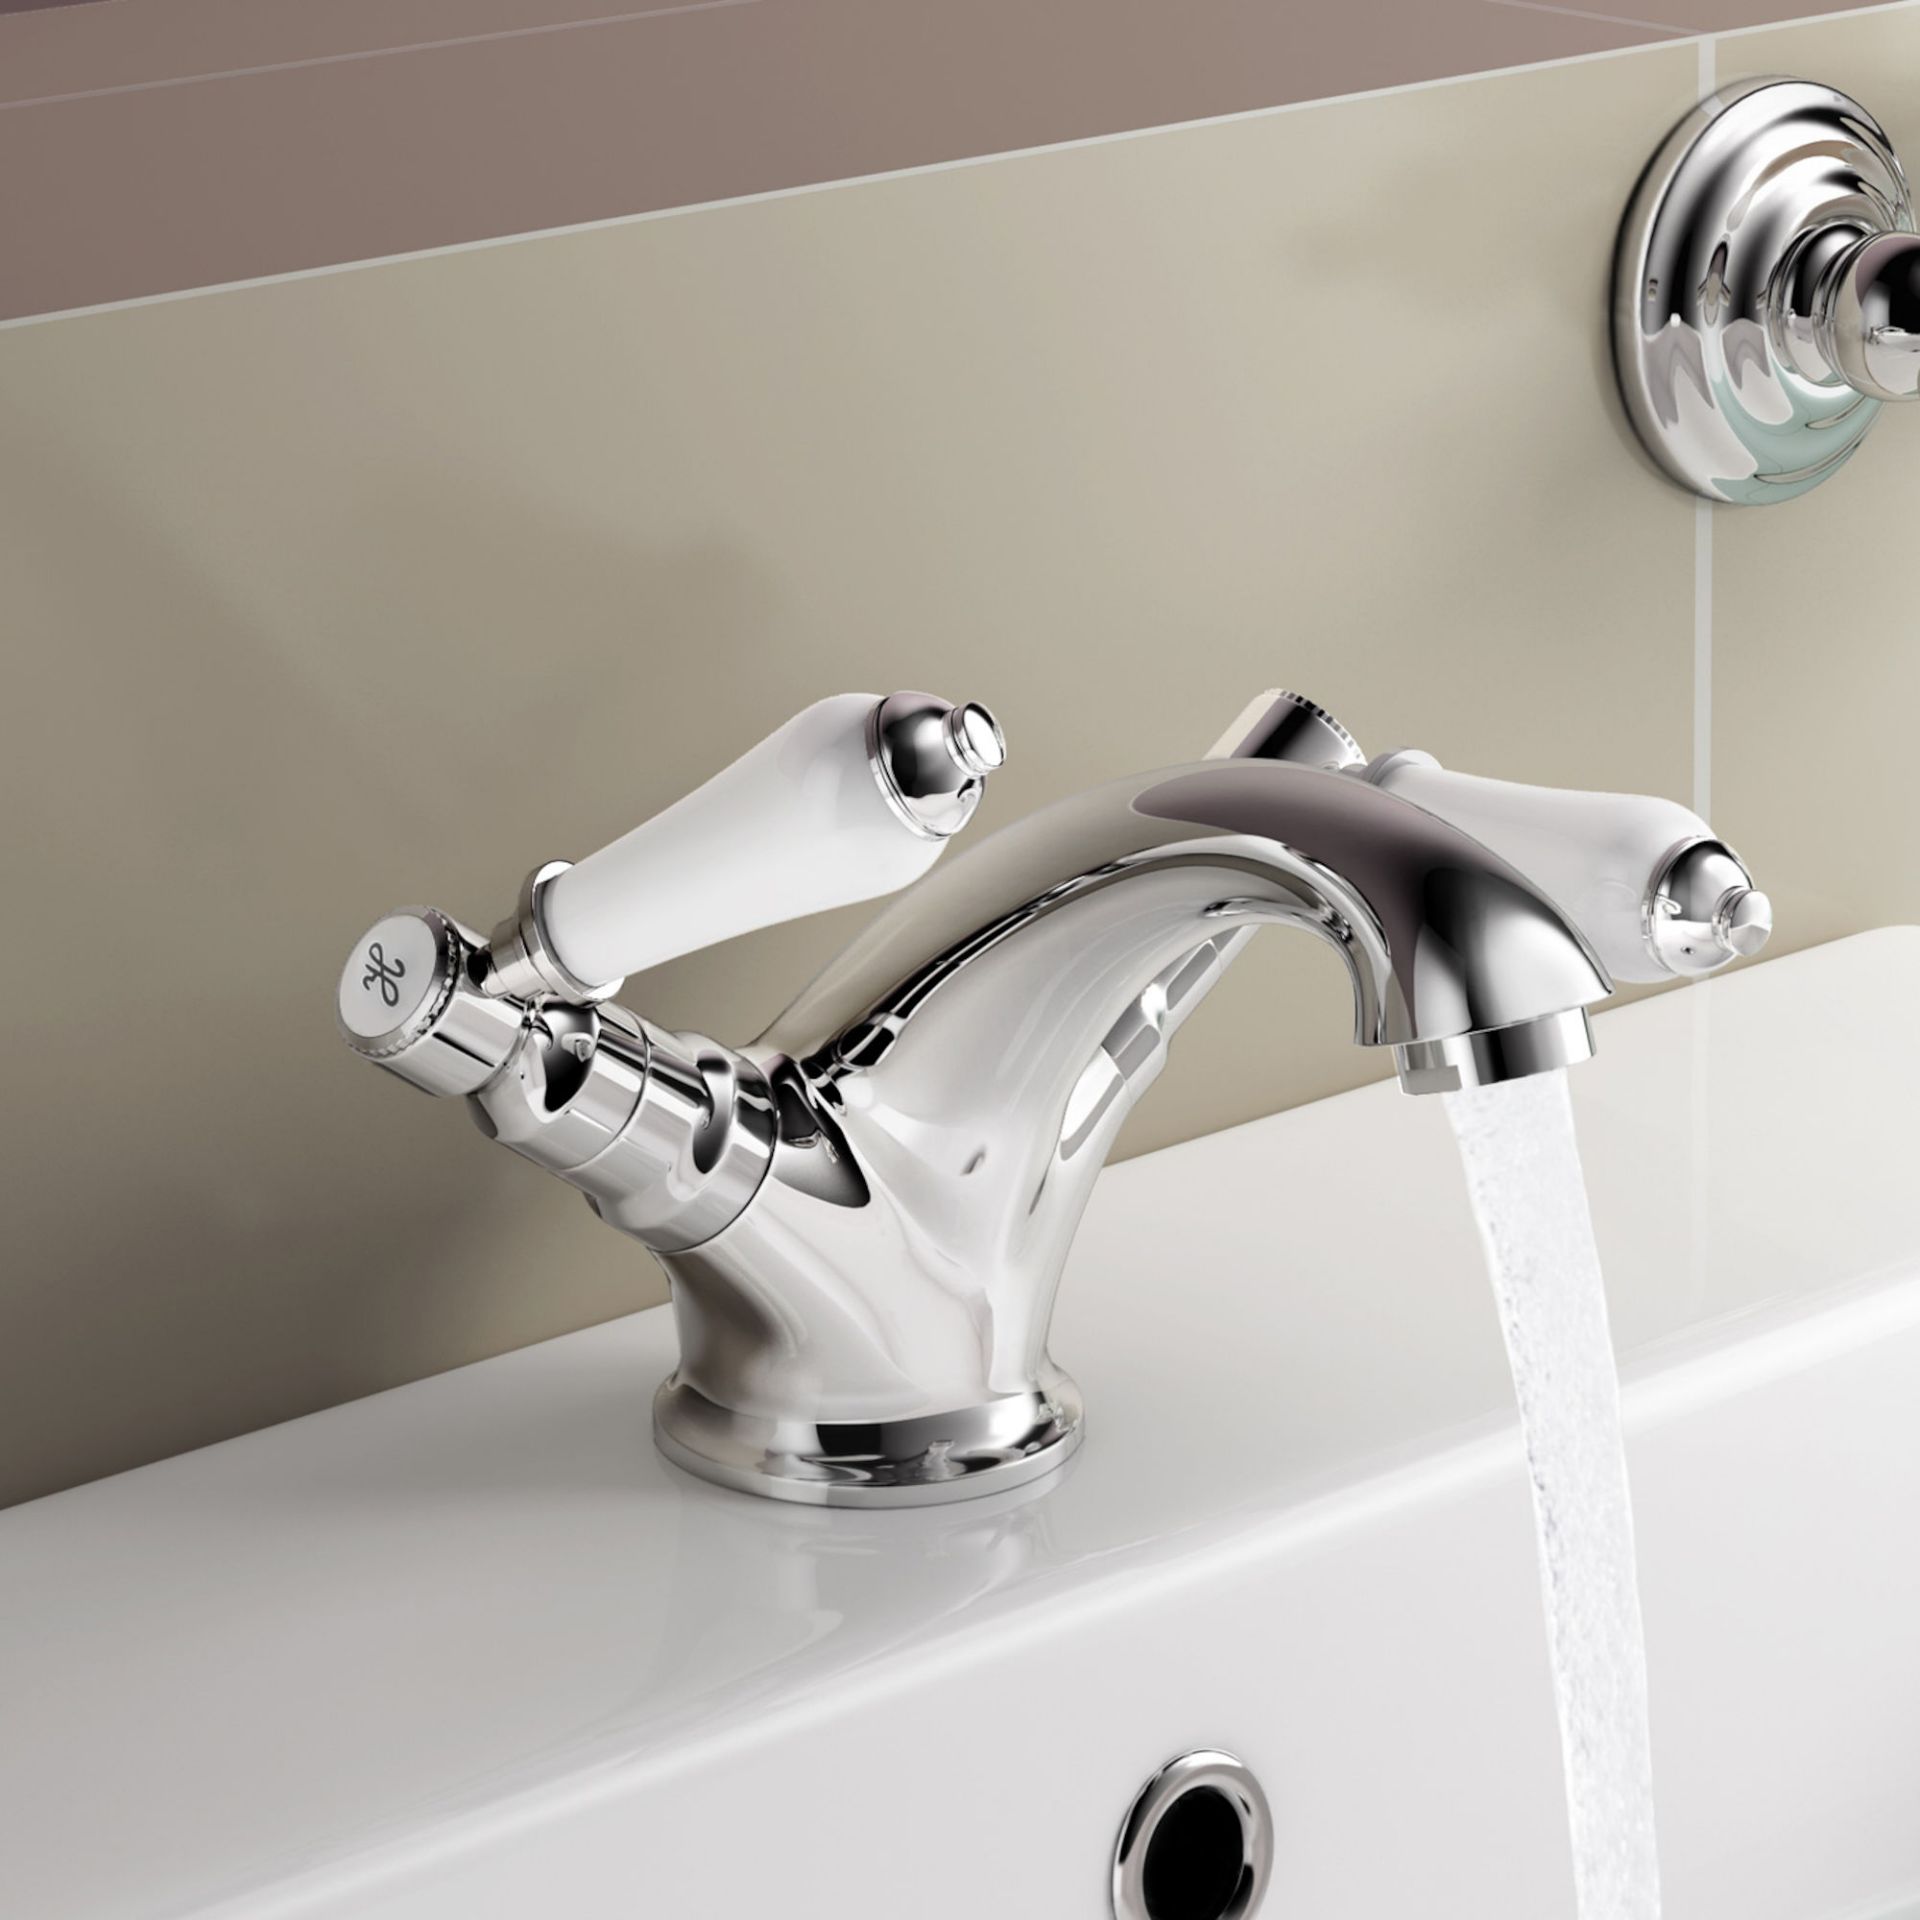 (SP91) Regal Chrome Traditional Basin Sink Lever Mixer Tap Chrome Plated Solid Brass Mixer cartridge